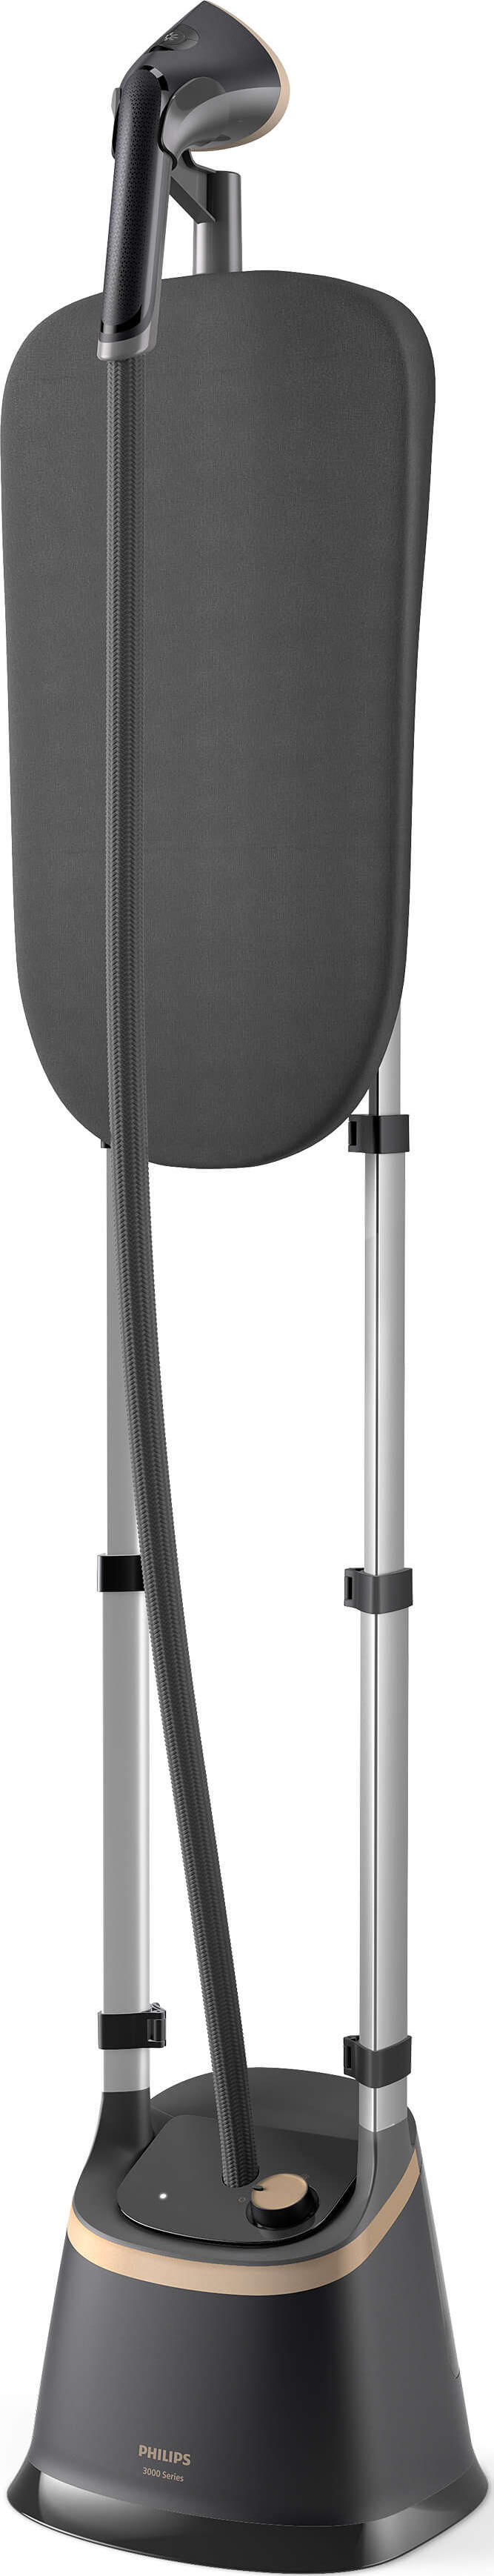 Philips 3000 Series STE 3170 (STE3170/80) - buy clothes steamer: prices,  reviews, specifications > price in stores Great Britain: London,  Manchester, Glasgow, Birmingham, Edinburgh